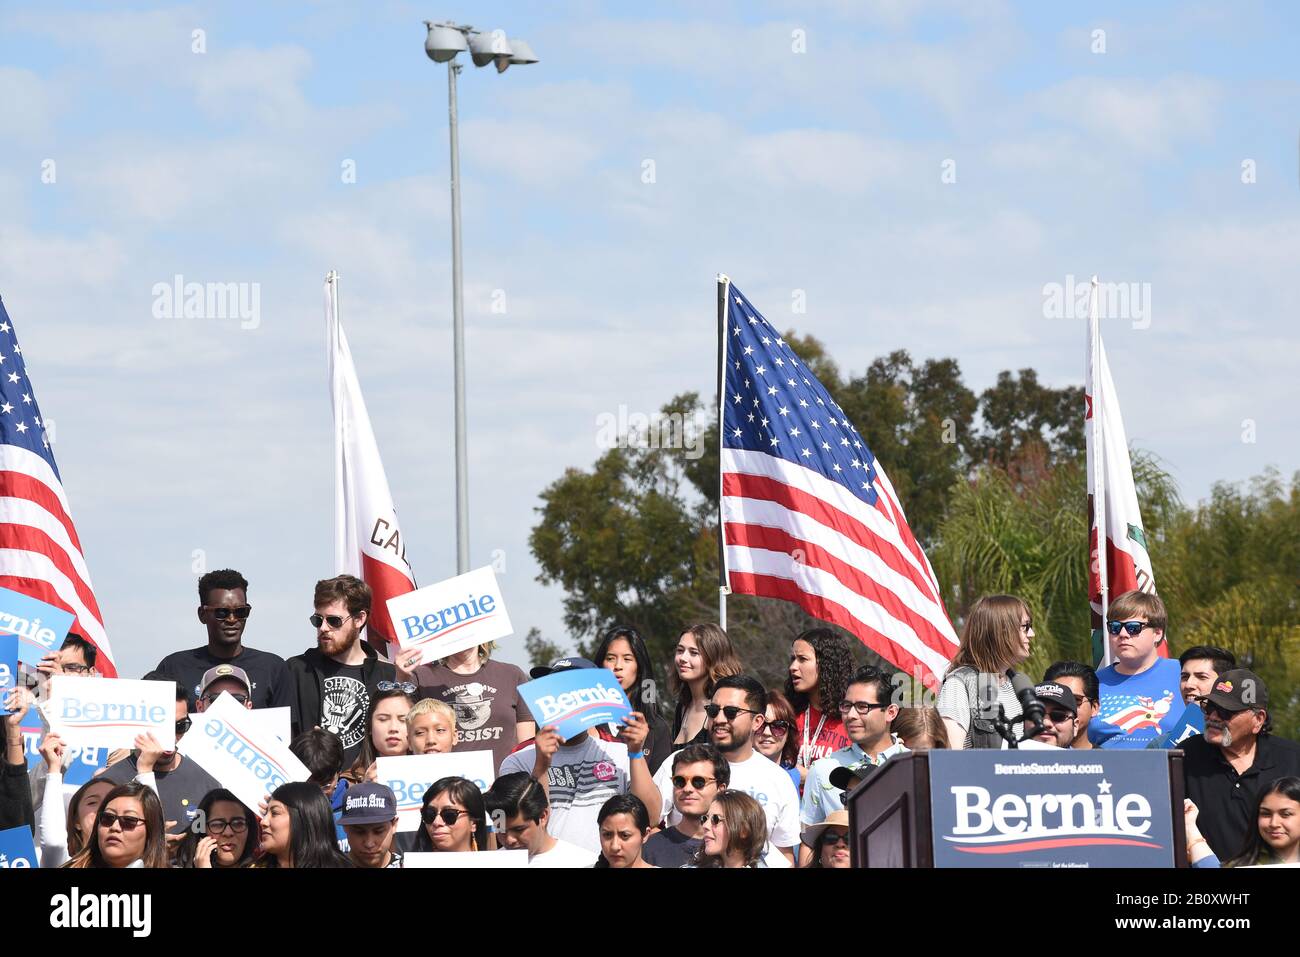 SANTA ANA, CALIFORNIA - 21 FEB 2020: Bernie Sanders Rally. Supporters on the stage awaiting the arrival of the presidential candidate. Stock Photo